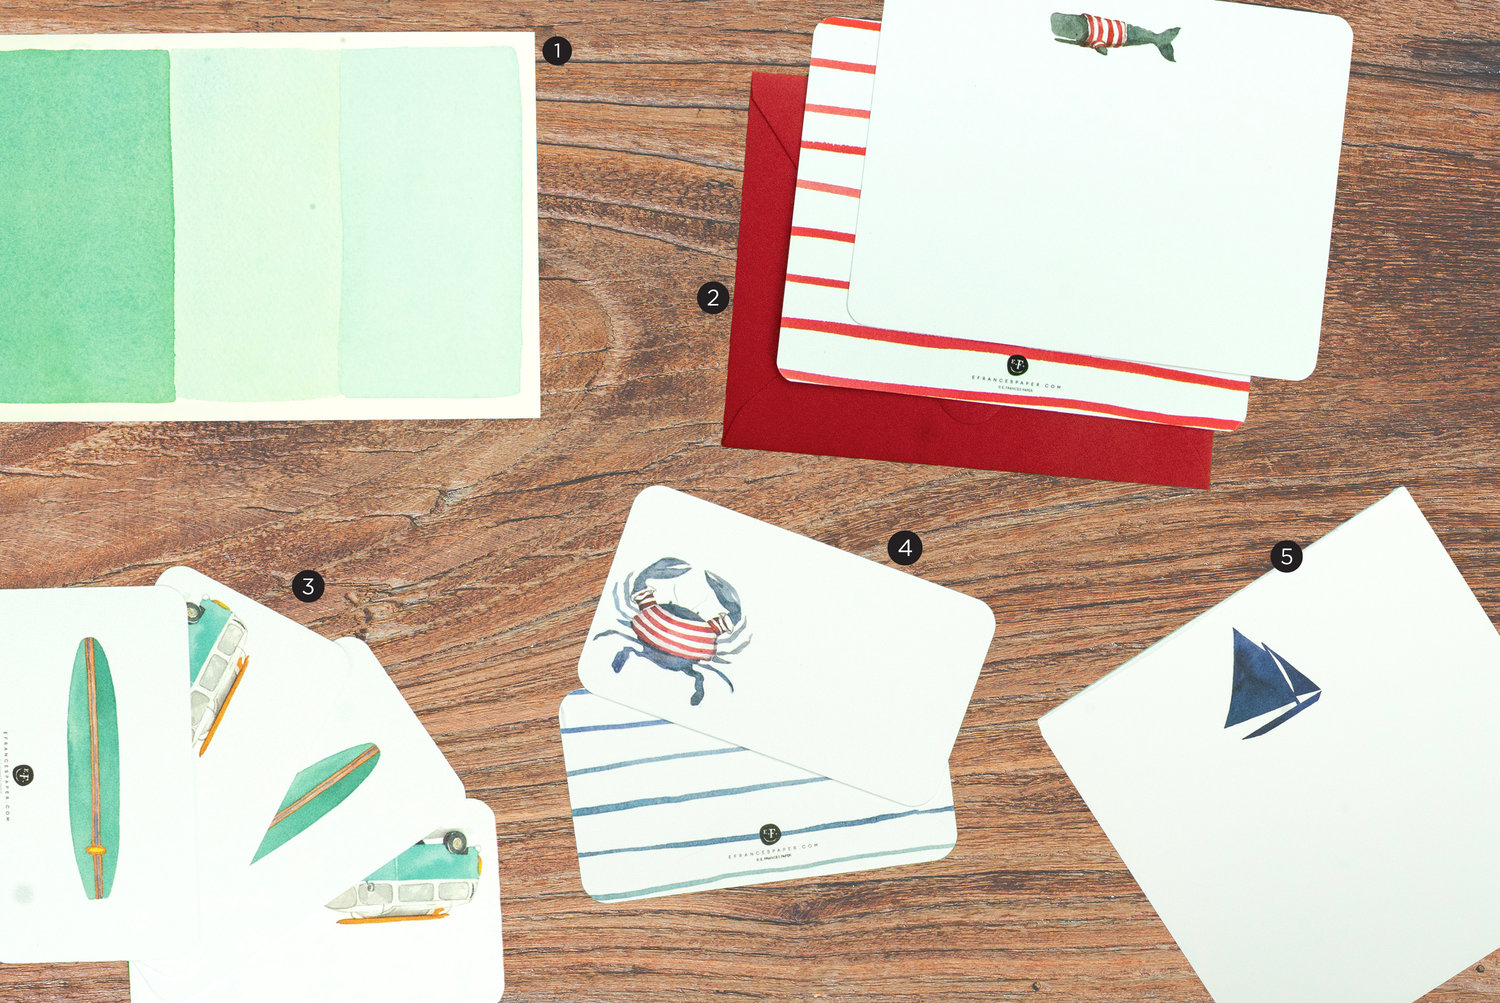 1. Marine Layers Notepad, $17 | 
2. Whale Social Notes, $14 | 
3. Surf Bus Little Notes, $14 | 
4. Crabby Little Notes, $14 | 
5. Sailboat Notepad, $17